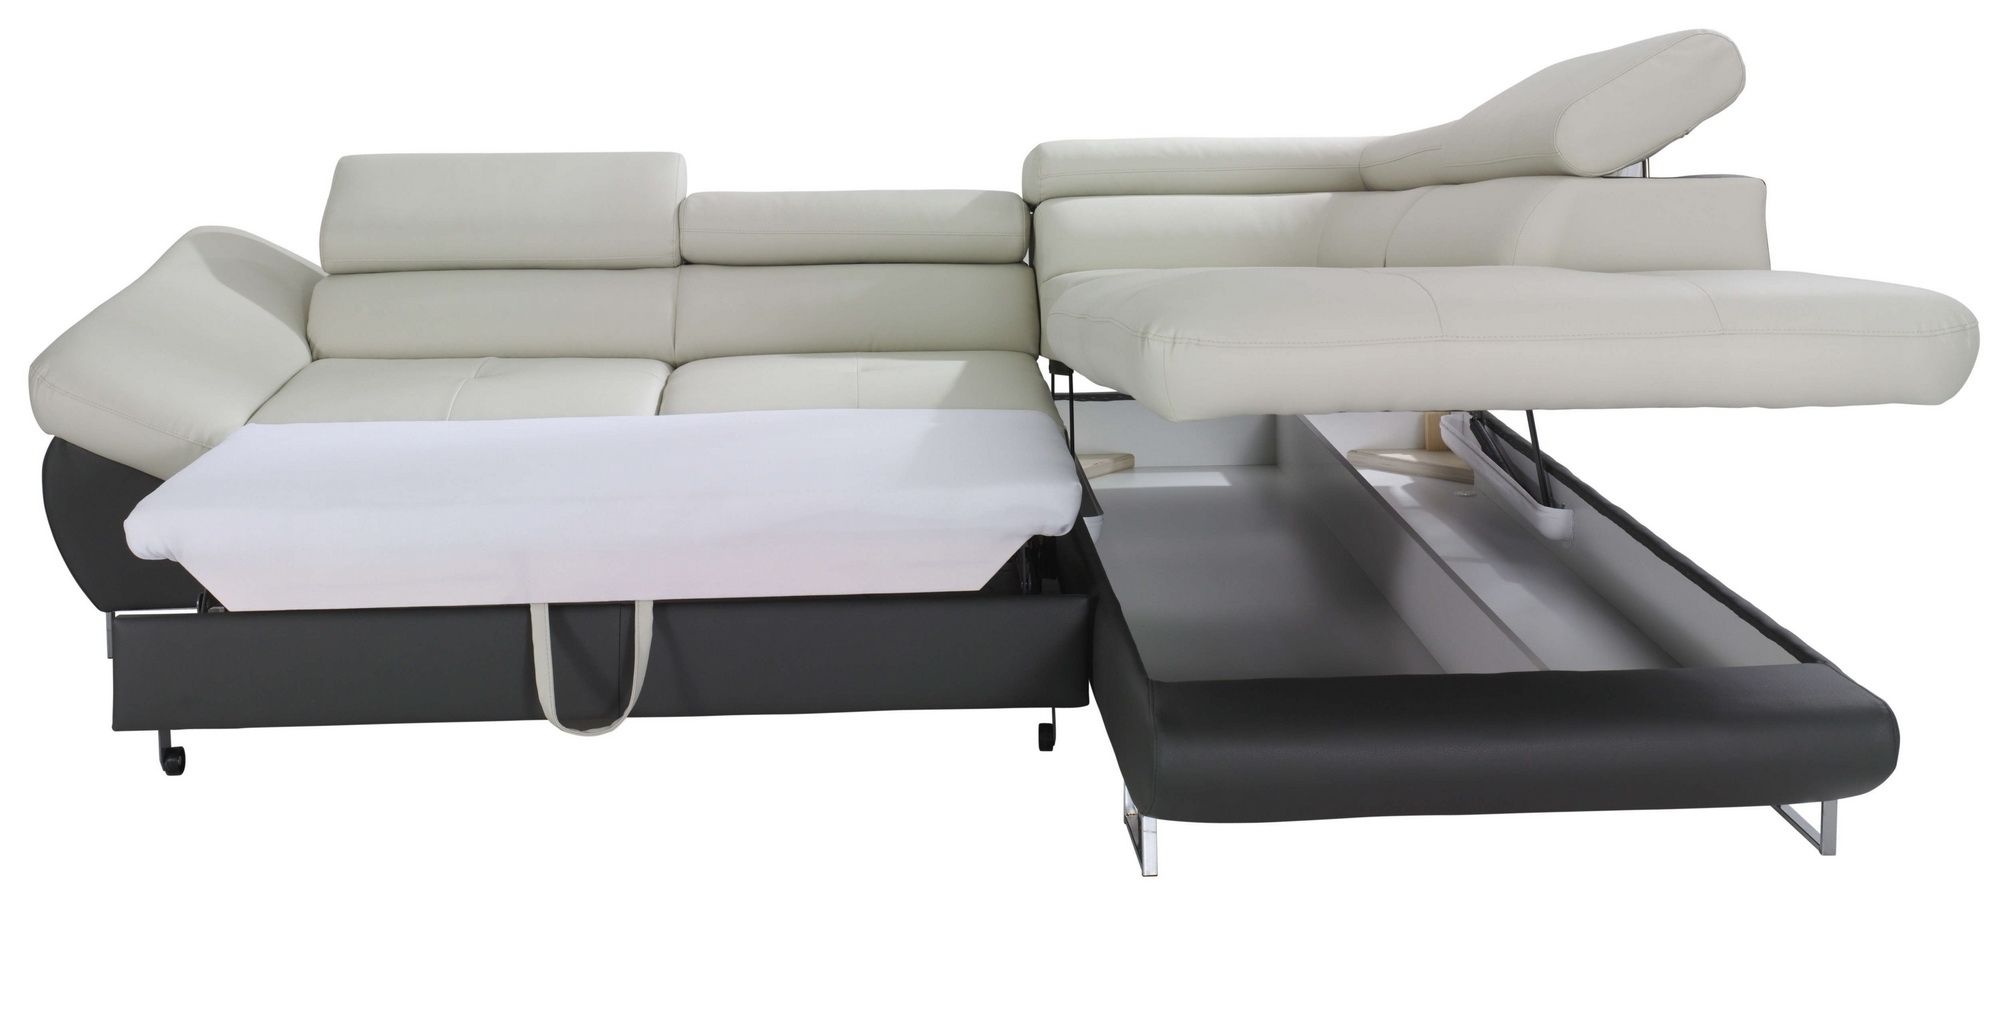 Favorite Sectional Sofas With Storage Pertaining To Fabio Sectional Sofa Sleeper With Storage, Creative Furniture (View 1 of 20)